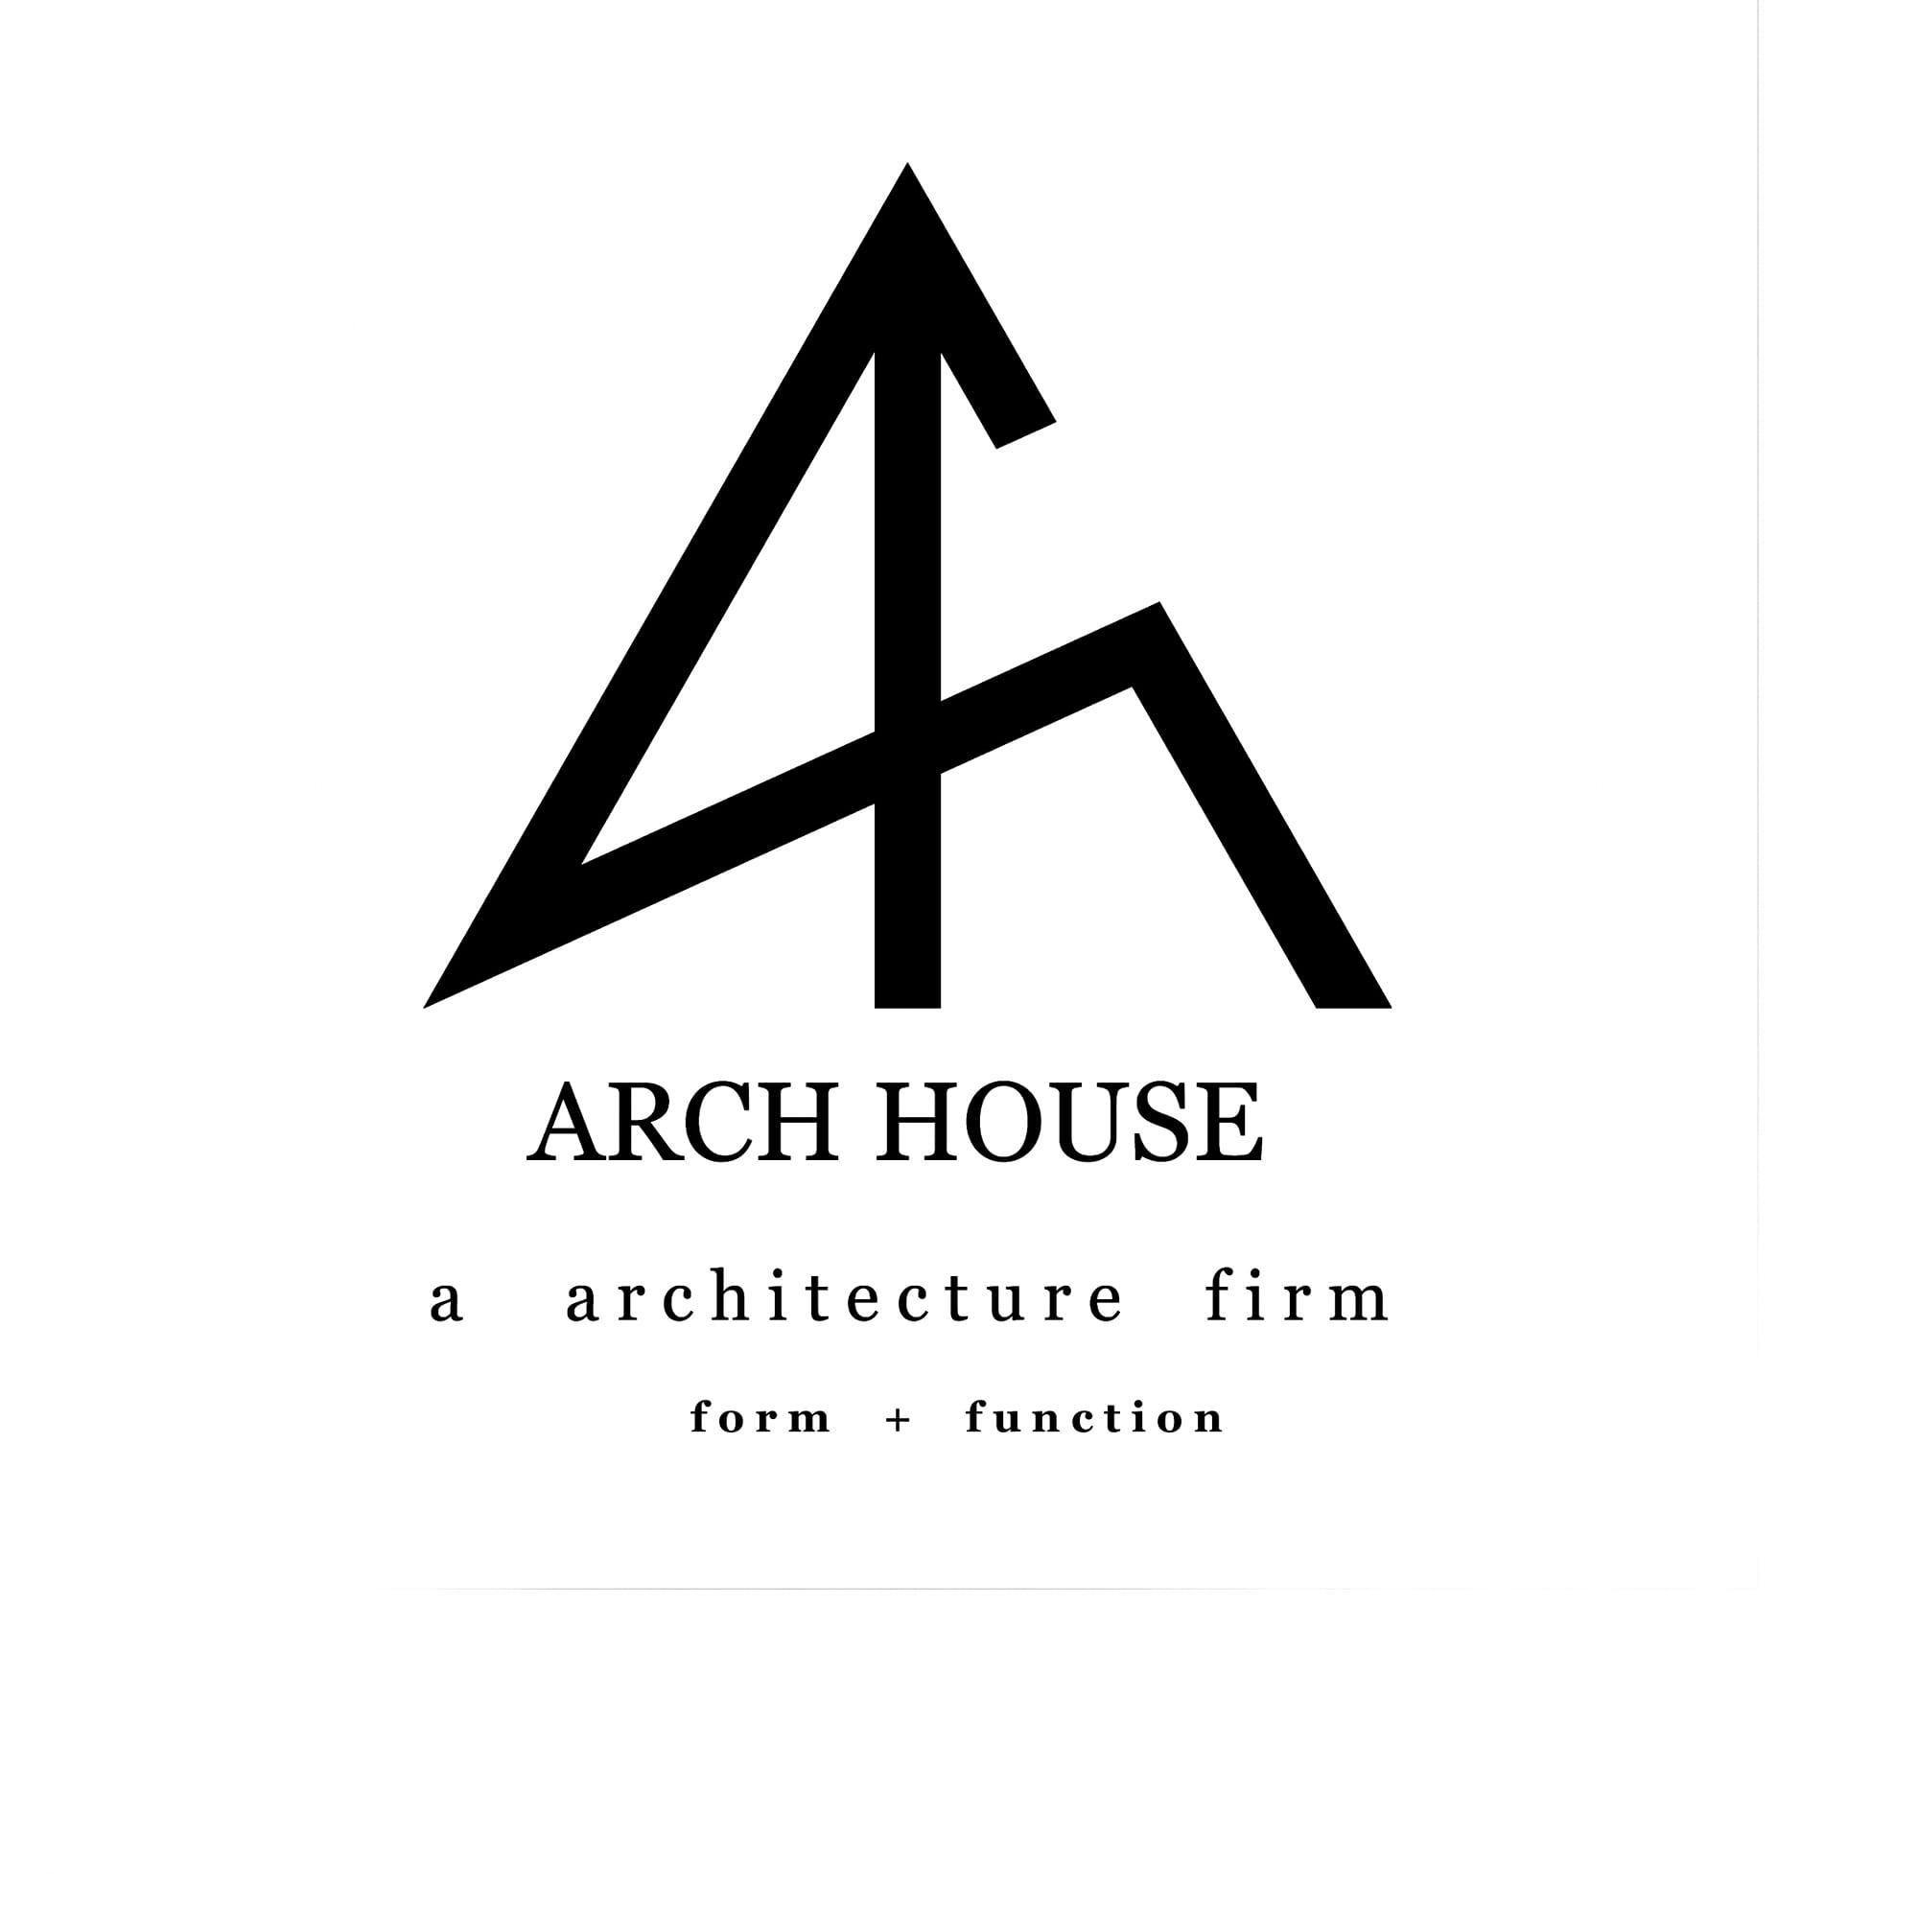 ARCHHOUSE-a architecture firm|Architect|Professional Services